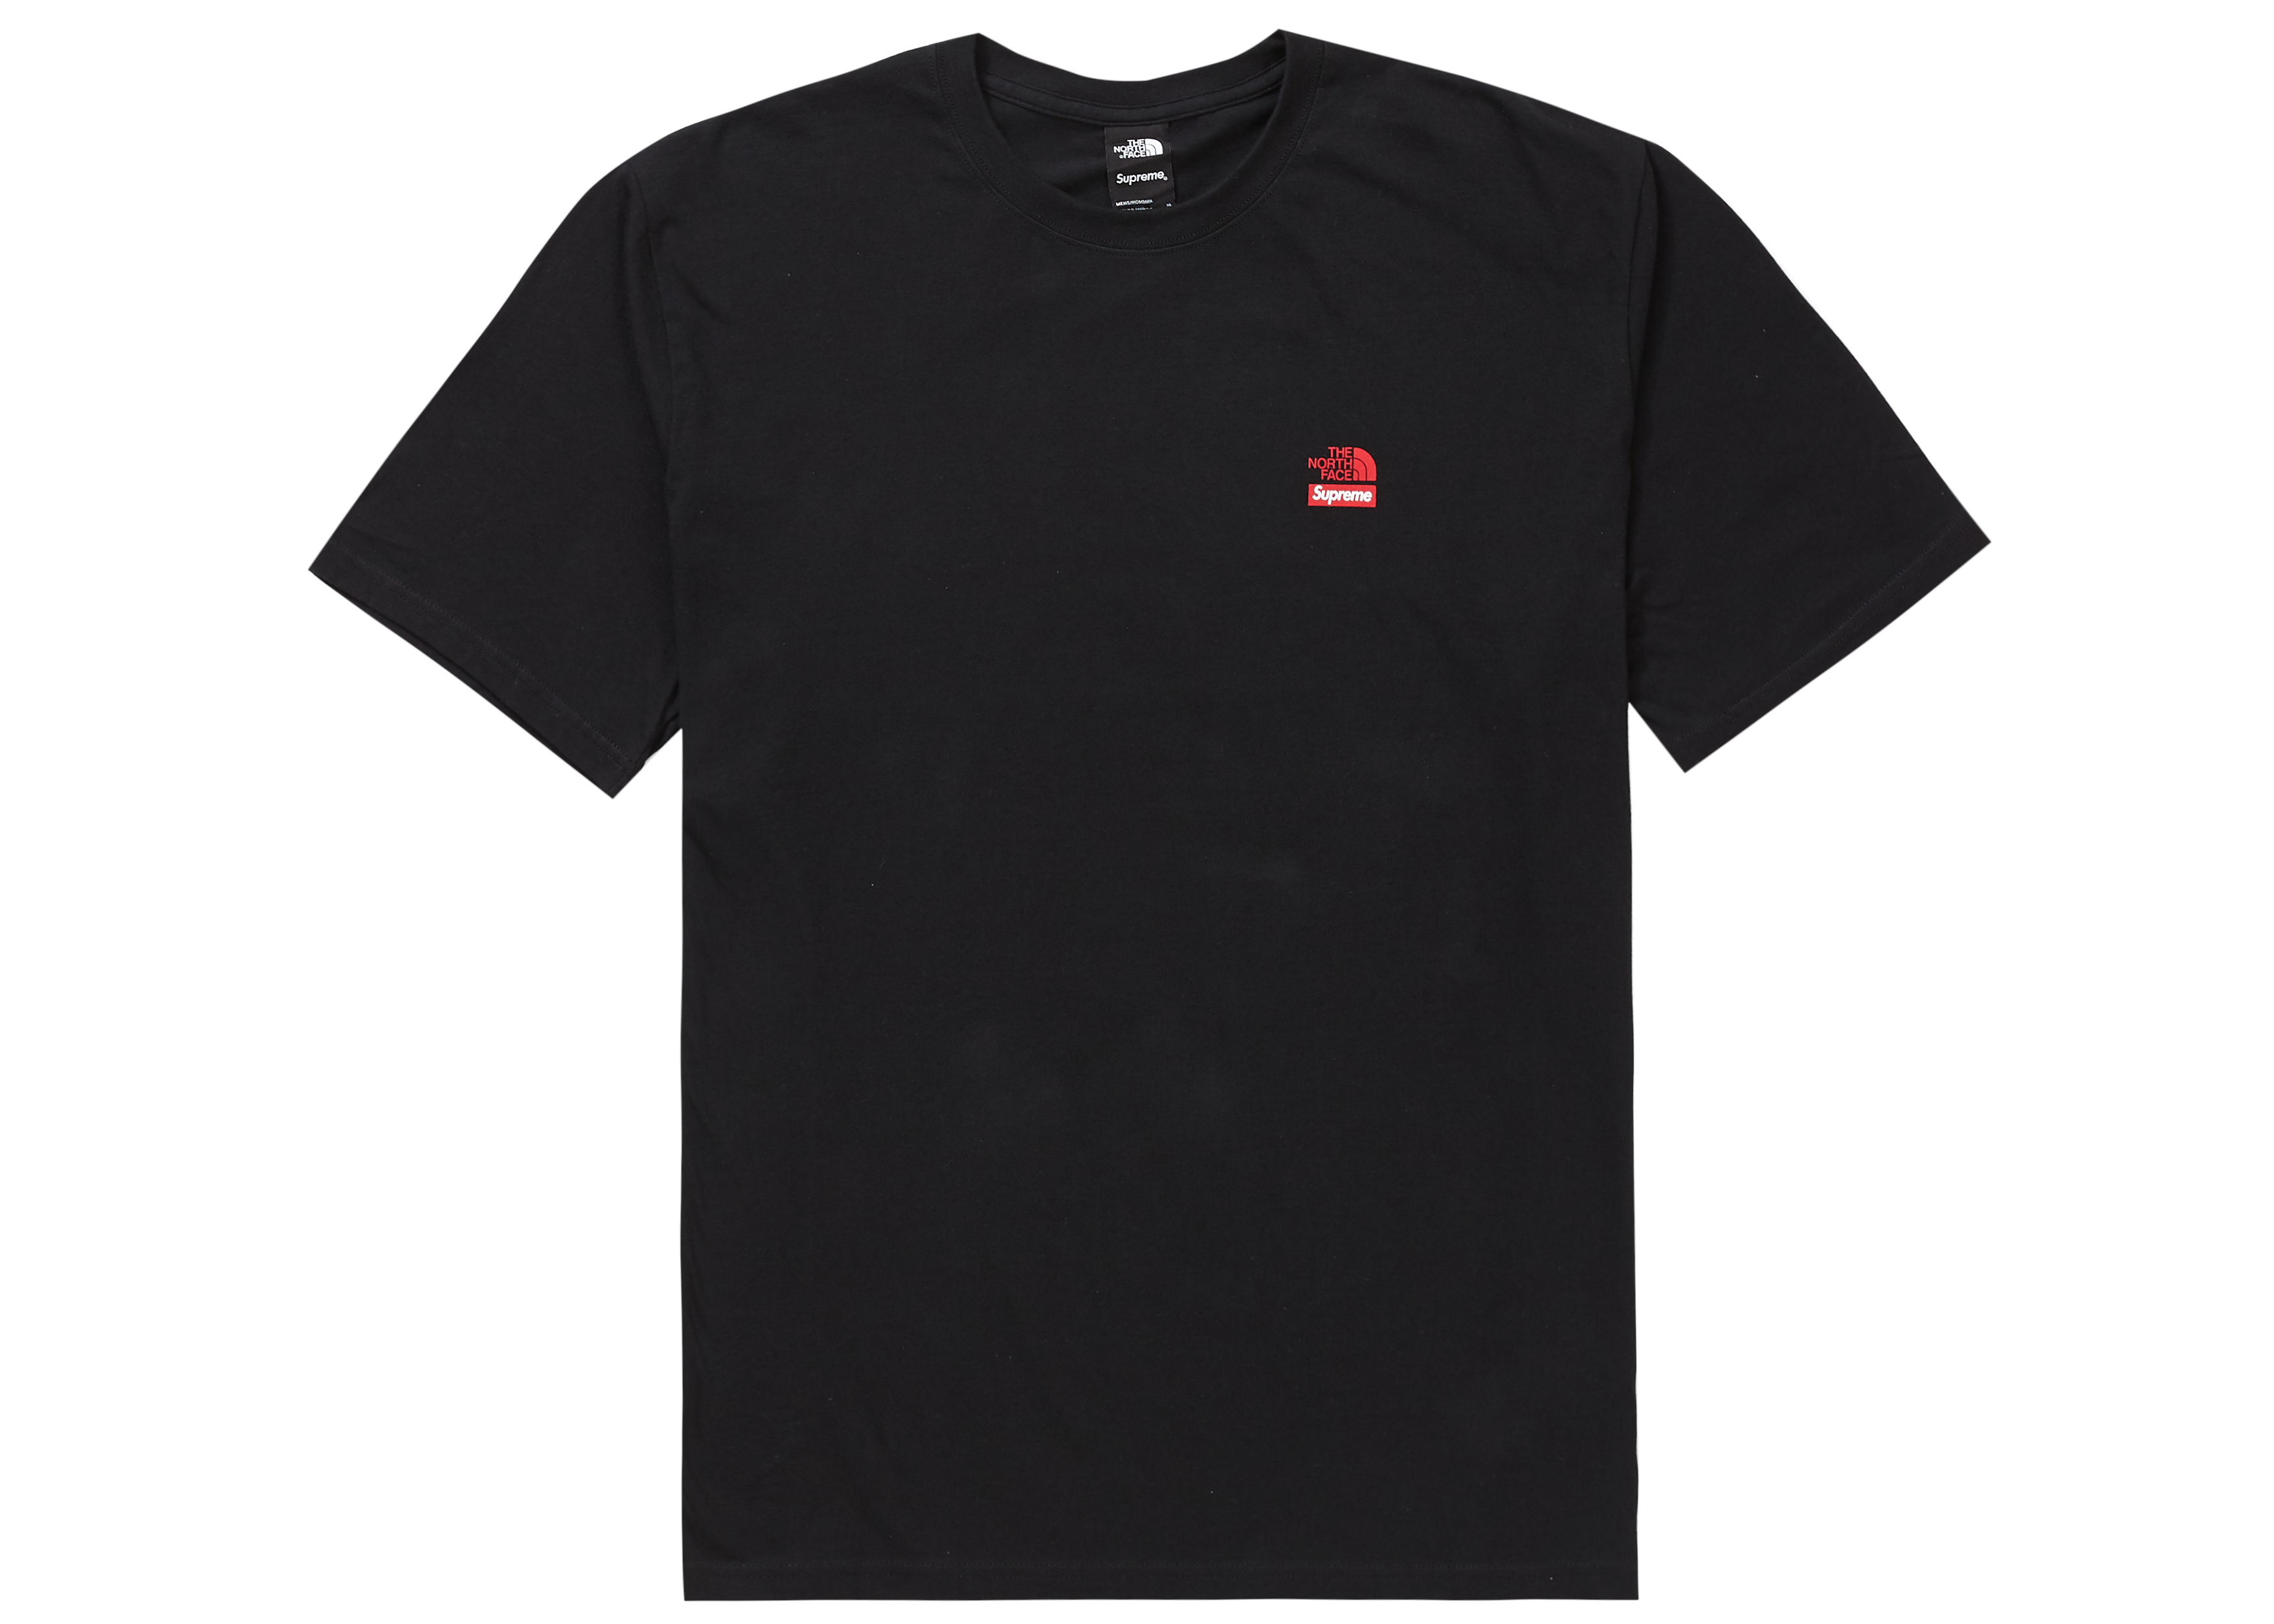 Supreme x The North Face Statue of Liberty Tee Black - Novelship